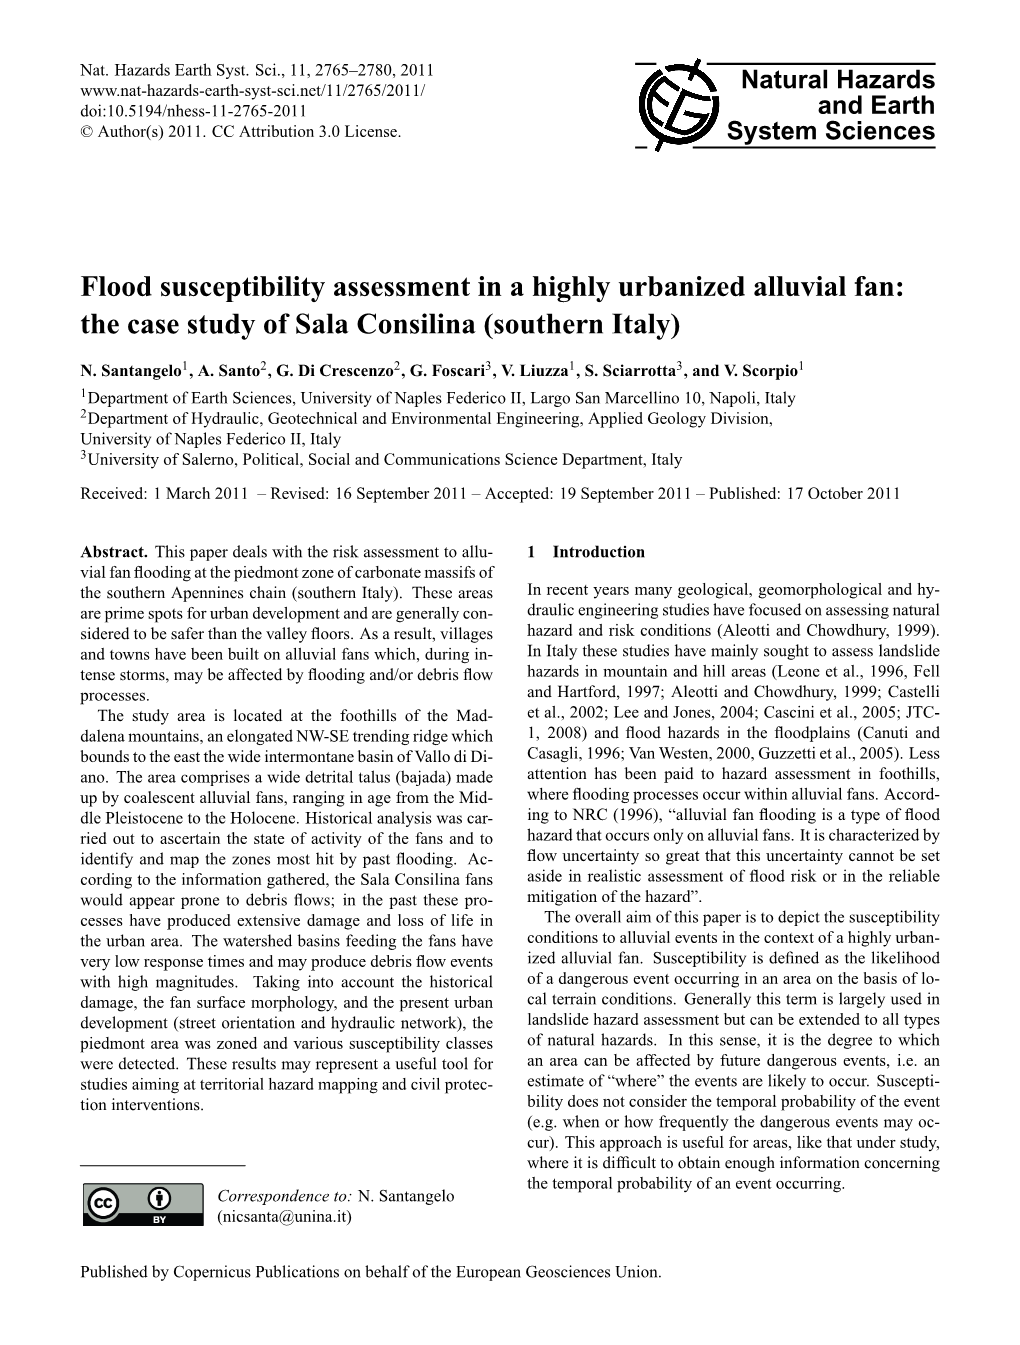 Flood Susceptibility Assessment in a Highly Urbanized Alluvial Fan: the Case Study of Sala Consilina (Southern Italy)